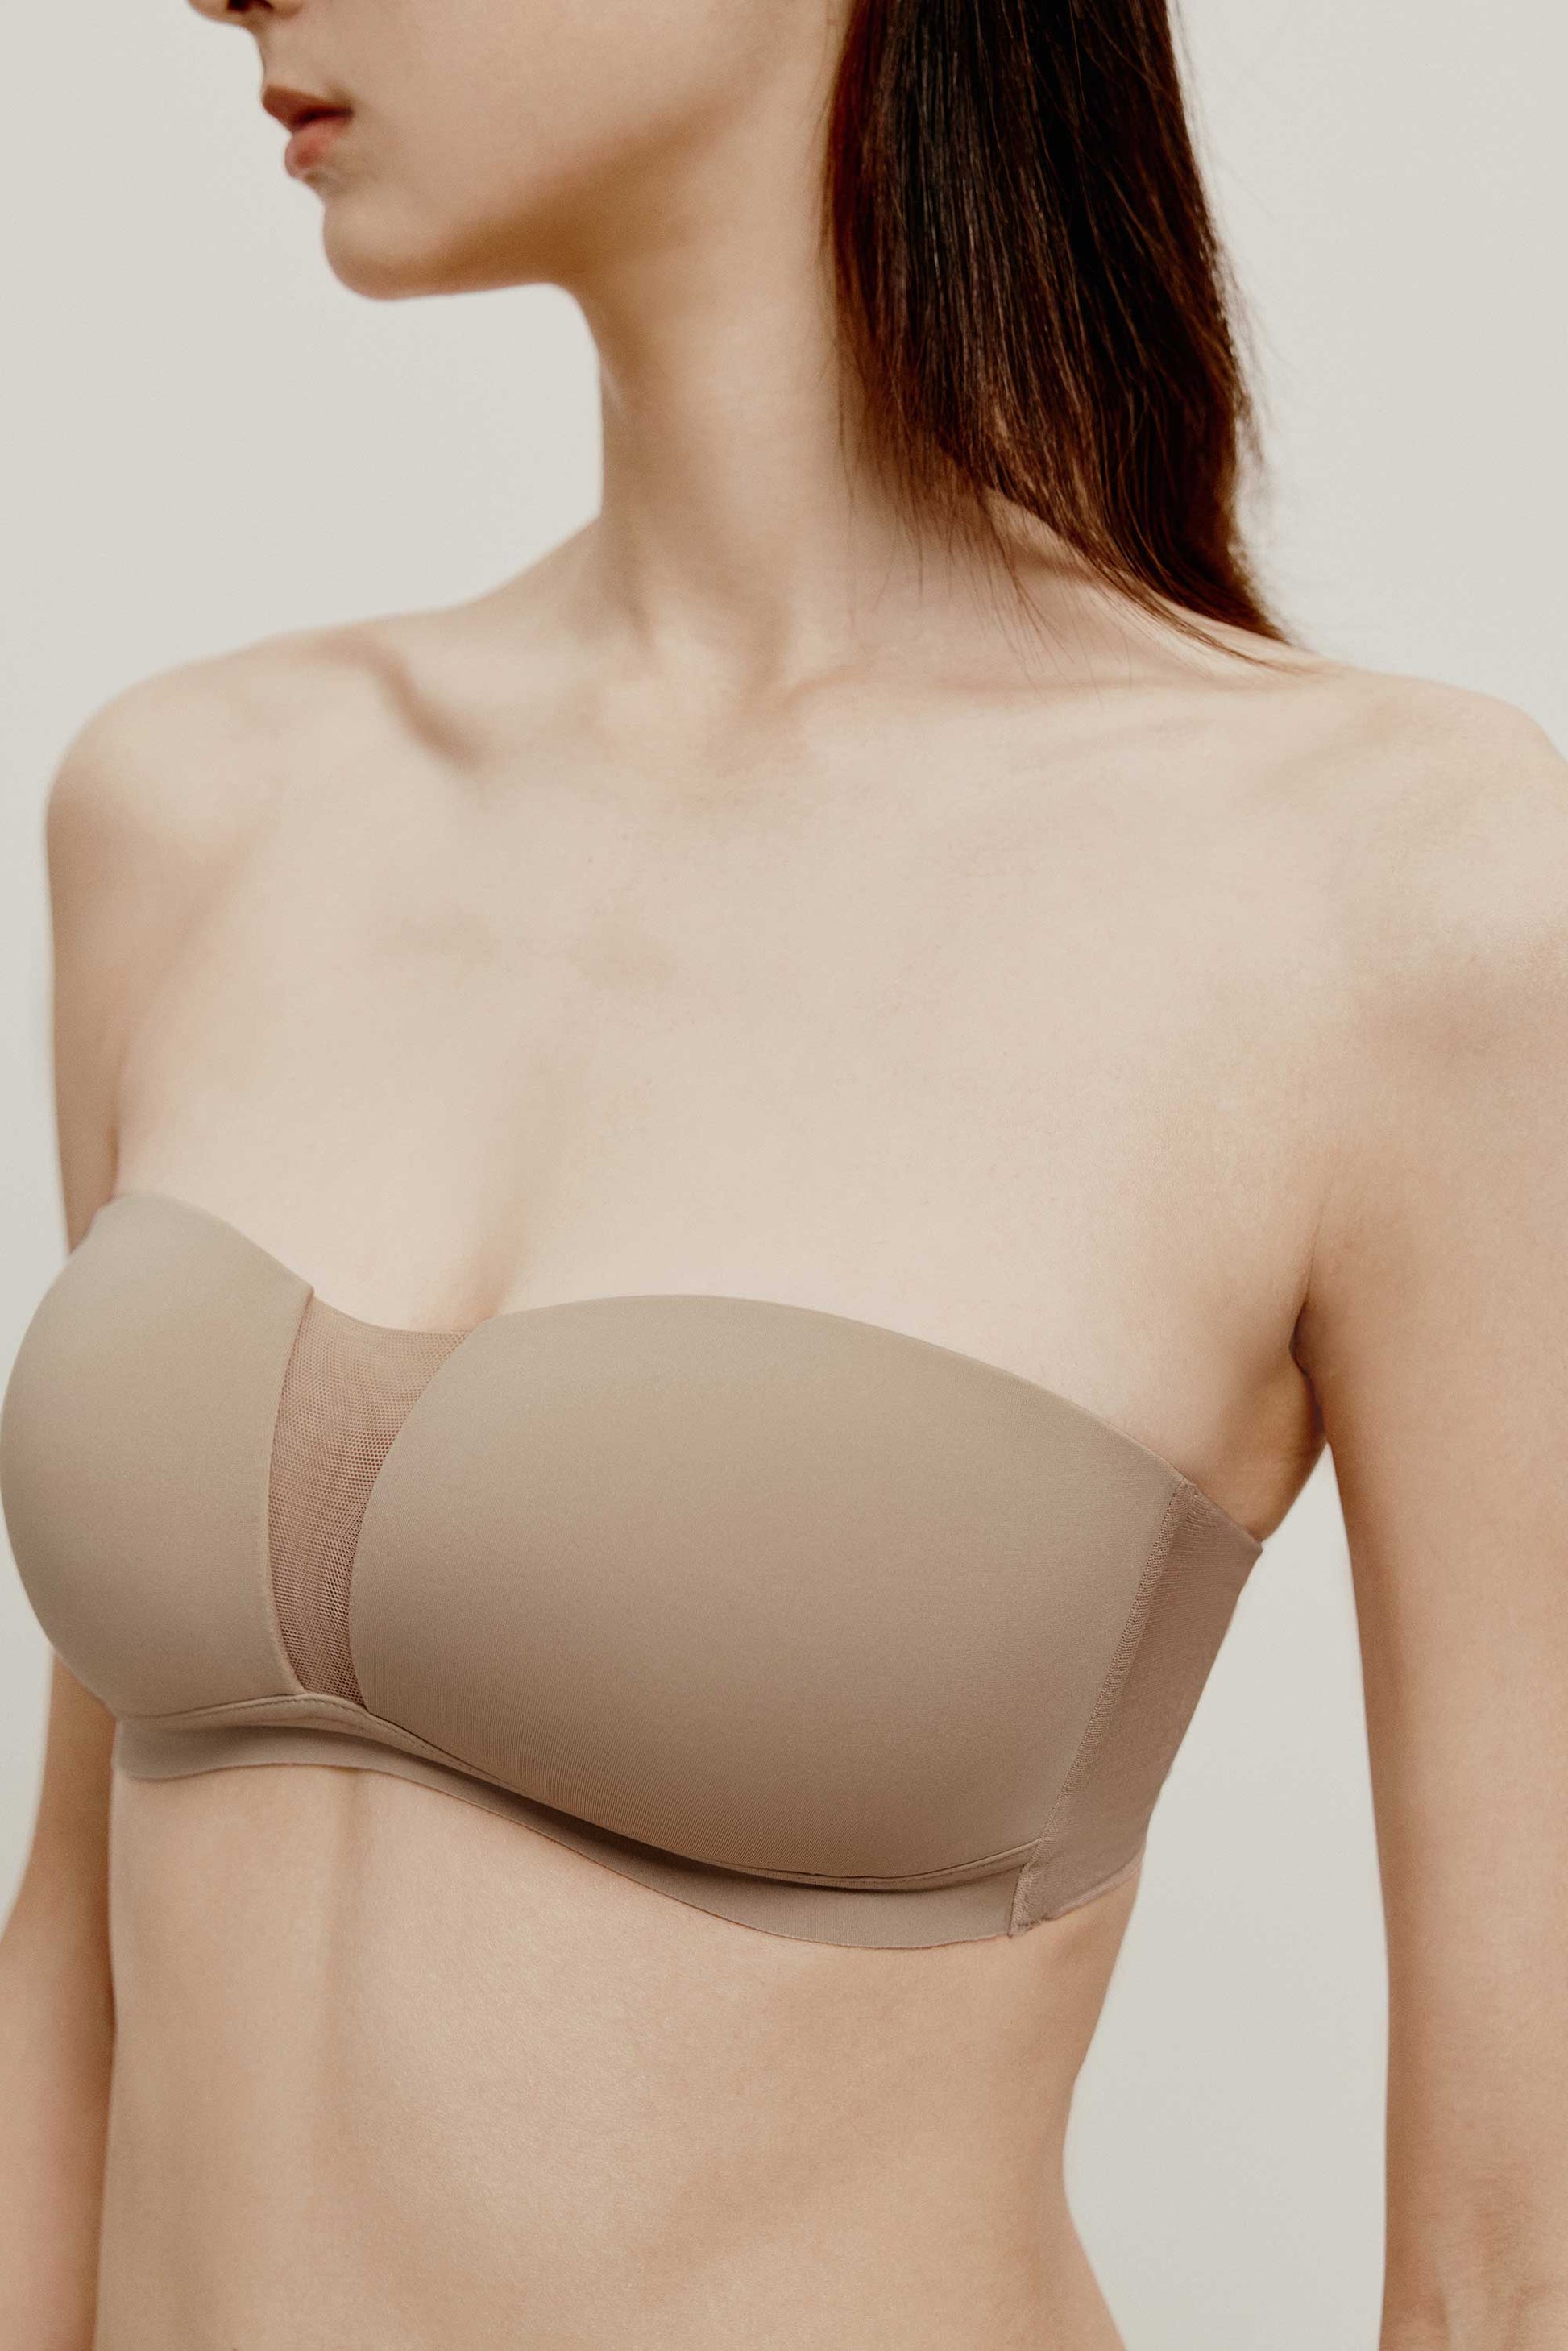 Prepare to feel the perfect blend of comfort and allure. Our bras